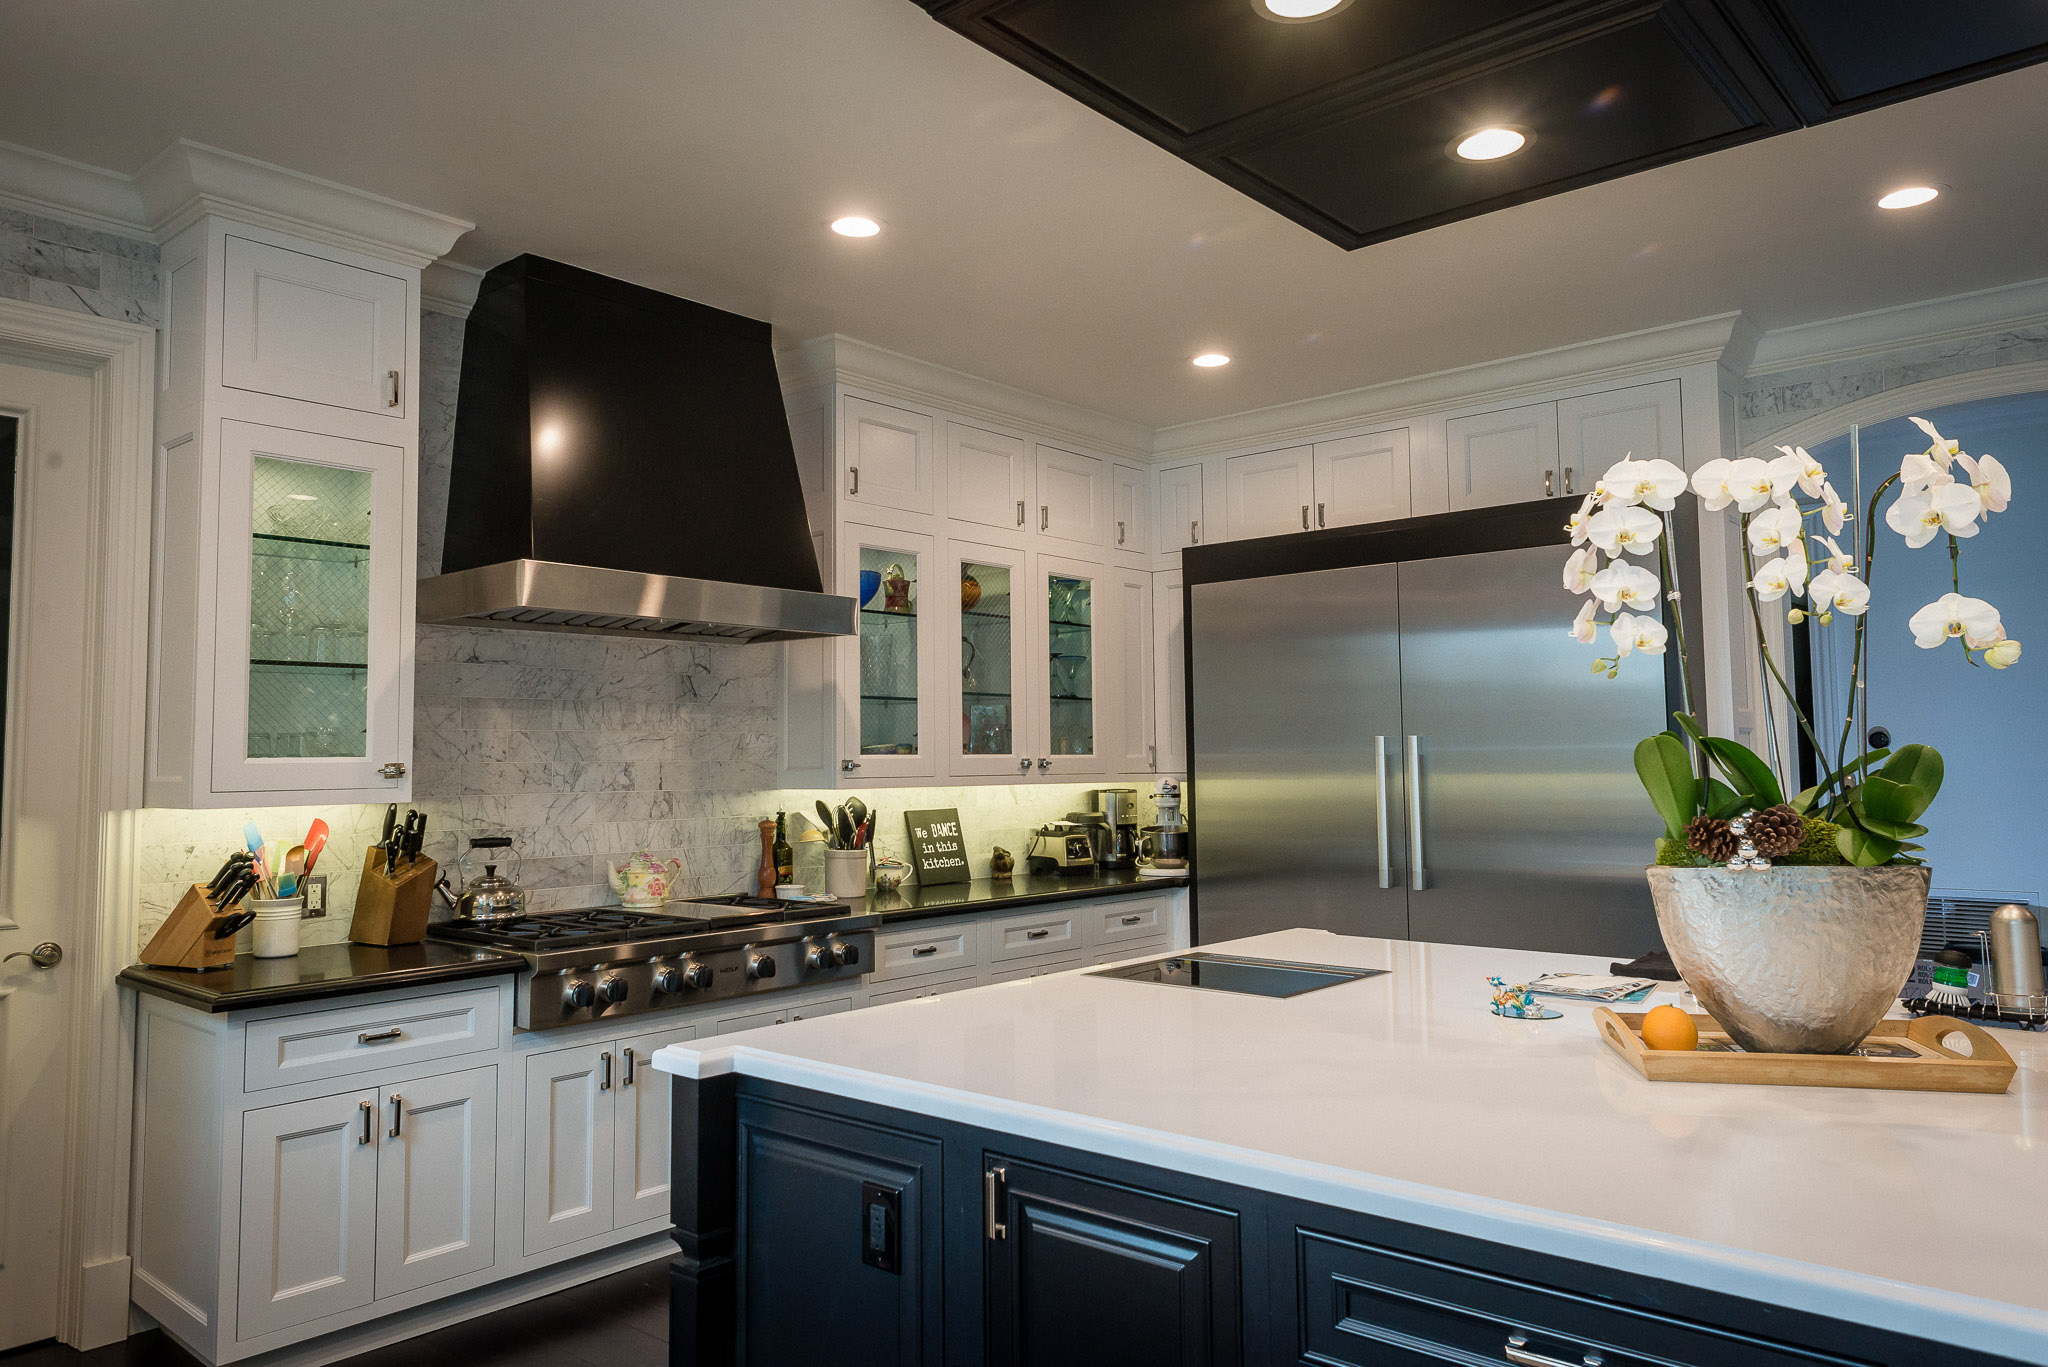 Modern kitchen interior with marble countertops and dark cabinets.